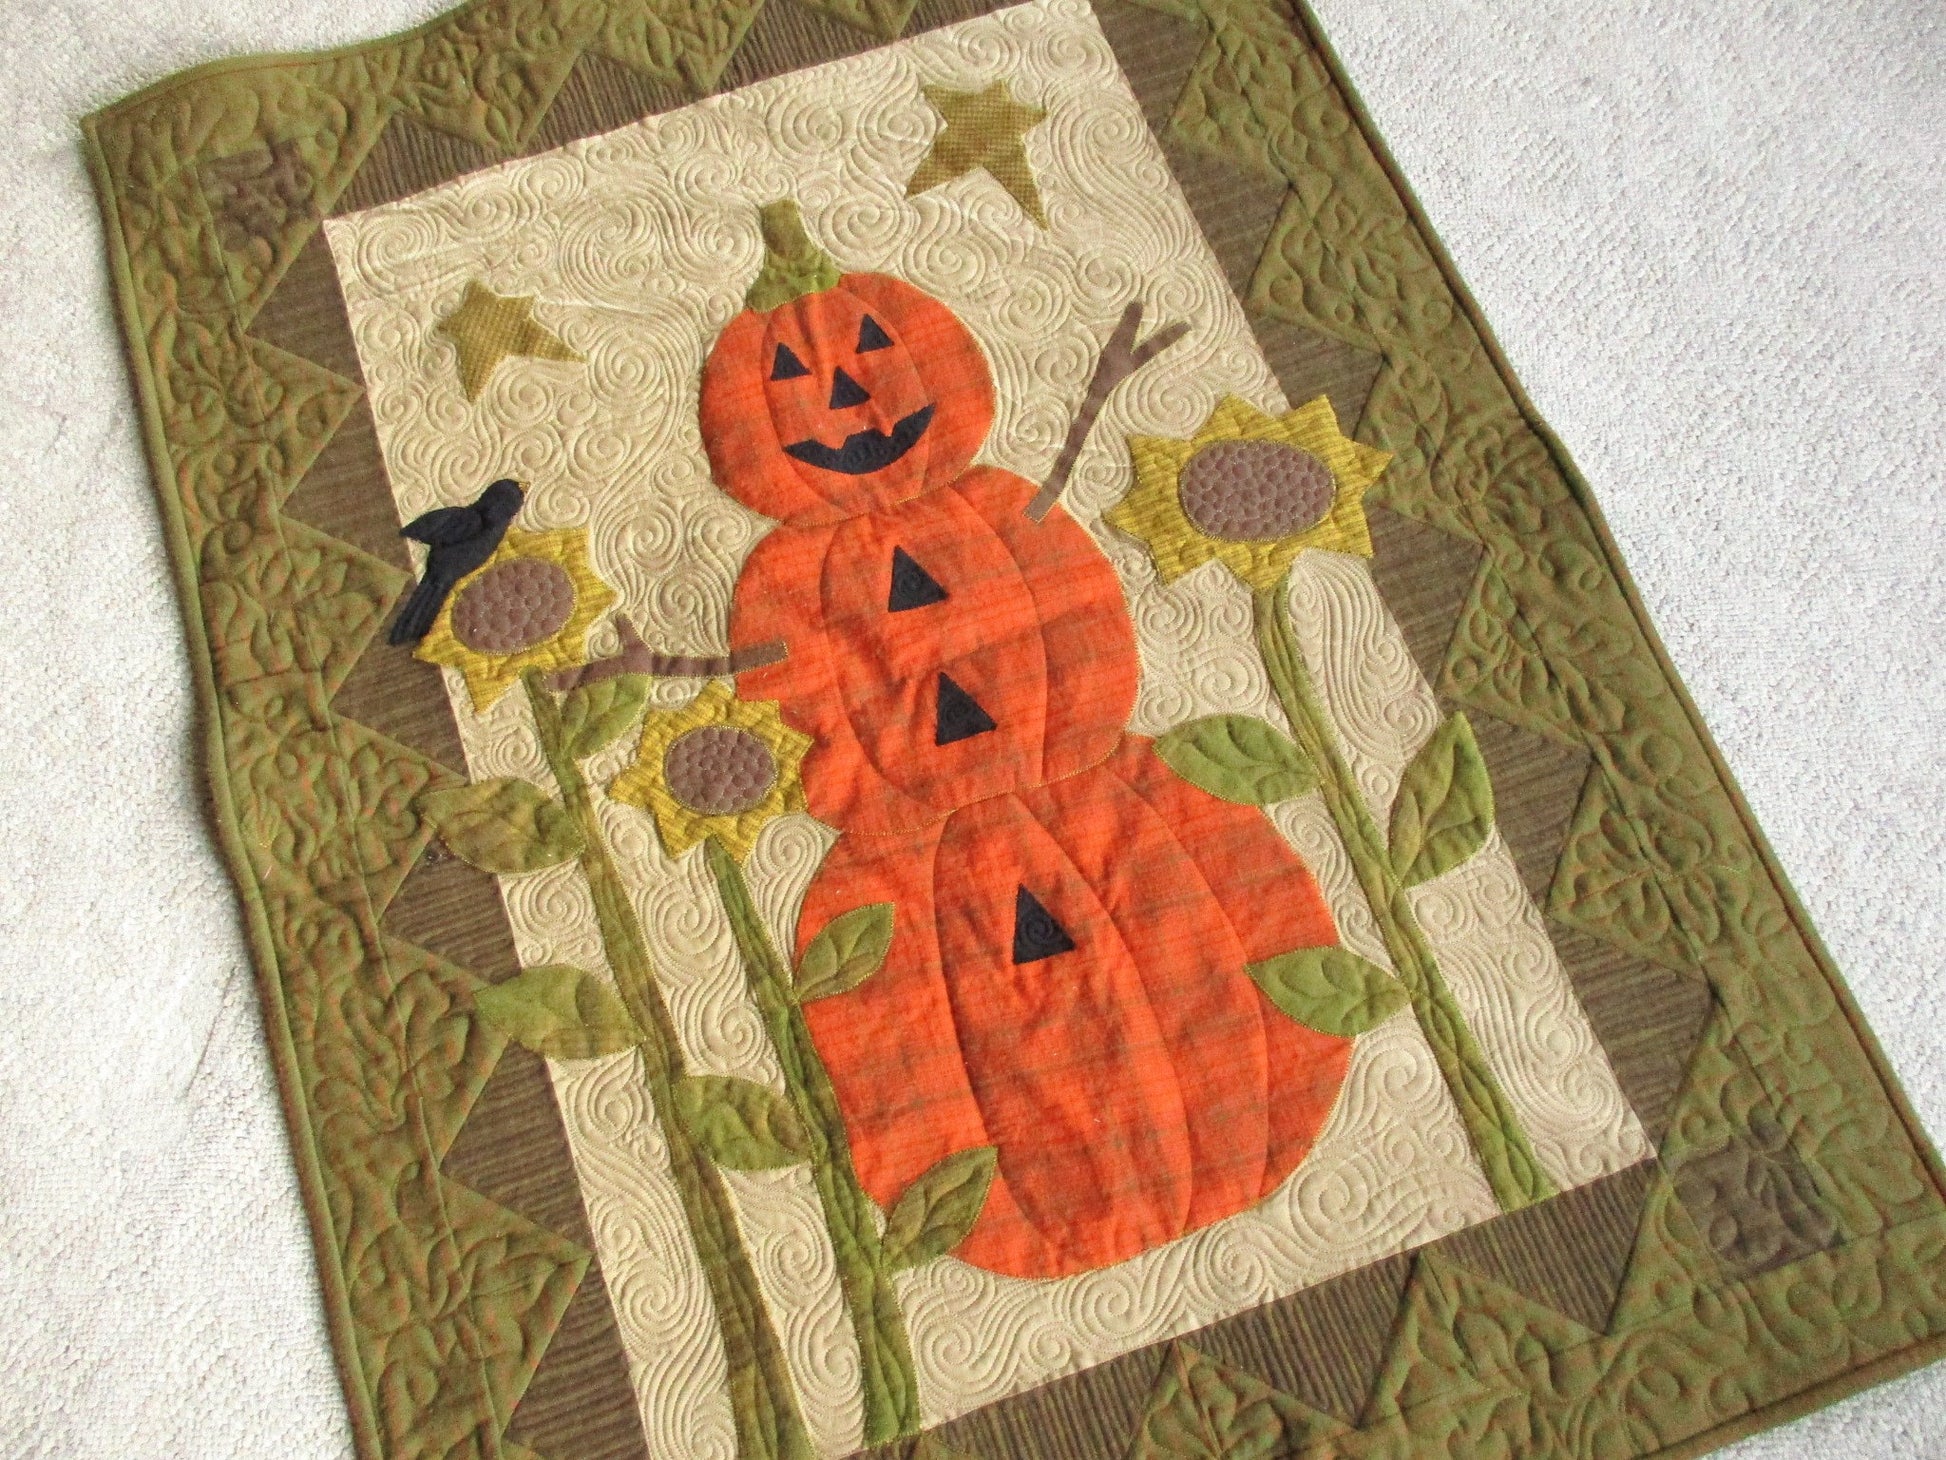 A large rustic quilted wall hanging features appliqued design elements. Find a pumpkin man with a jack-o-lantern face, tall sunflowers on stems with a crow sitting on one and stars in background. Beautiful custom quilting is a key feature of this wall quilt. Colors include burnt orange for the pumpkin man, antique gold sunflowers, drab olive green and brown and a tan background. 